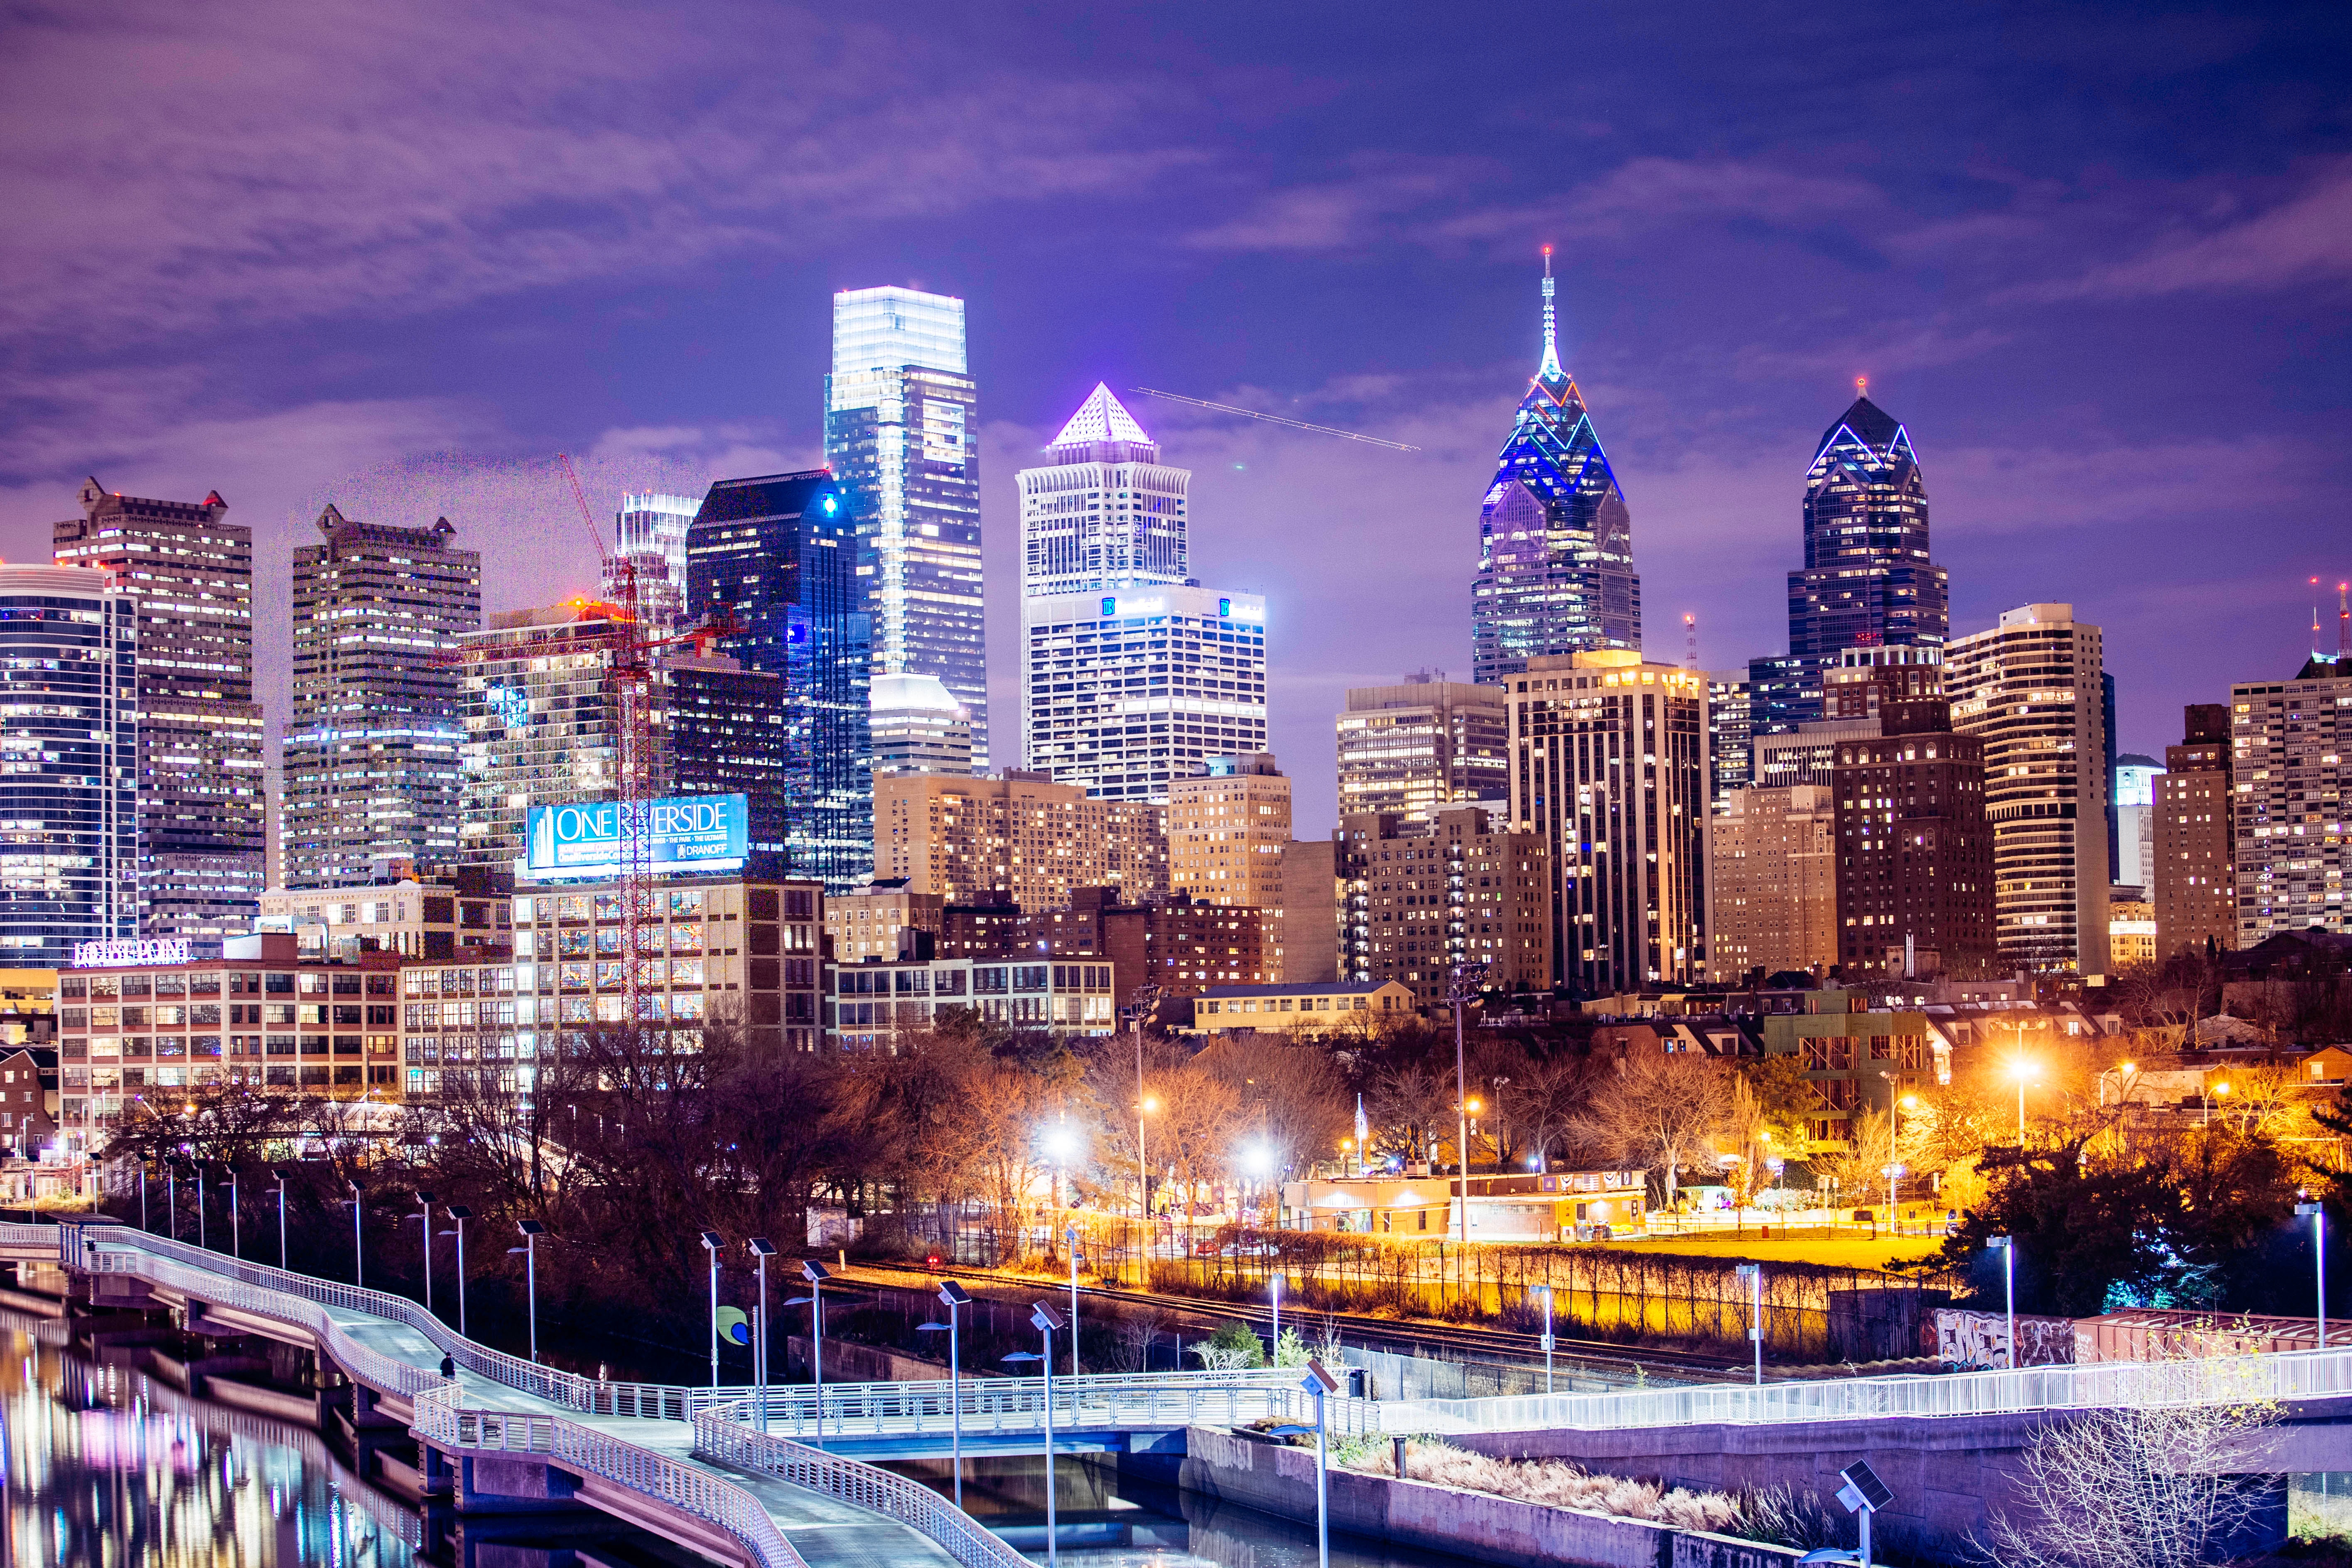 WATCH: This Video Series Shows You The Real Philadelphia